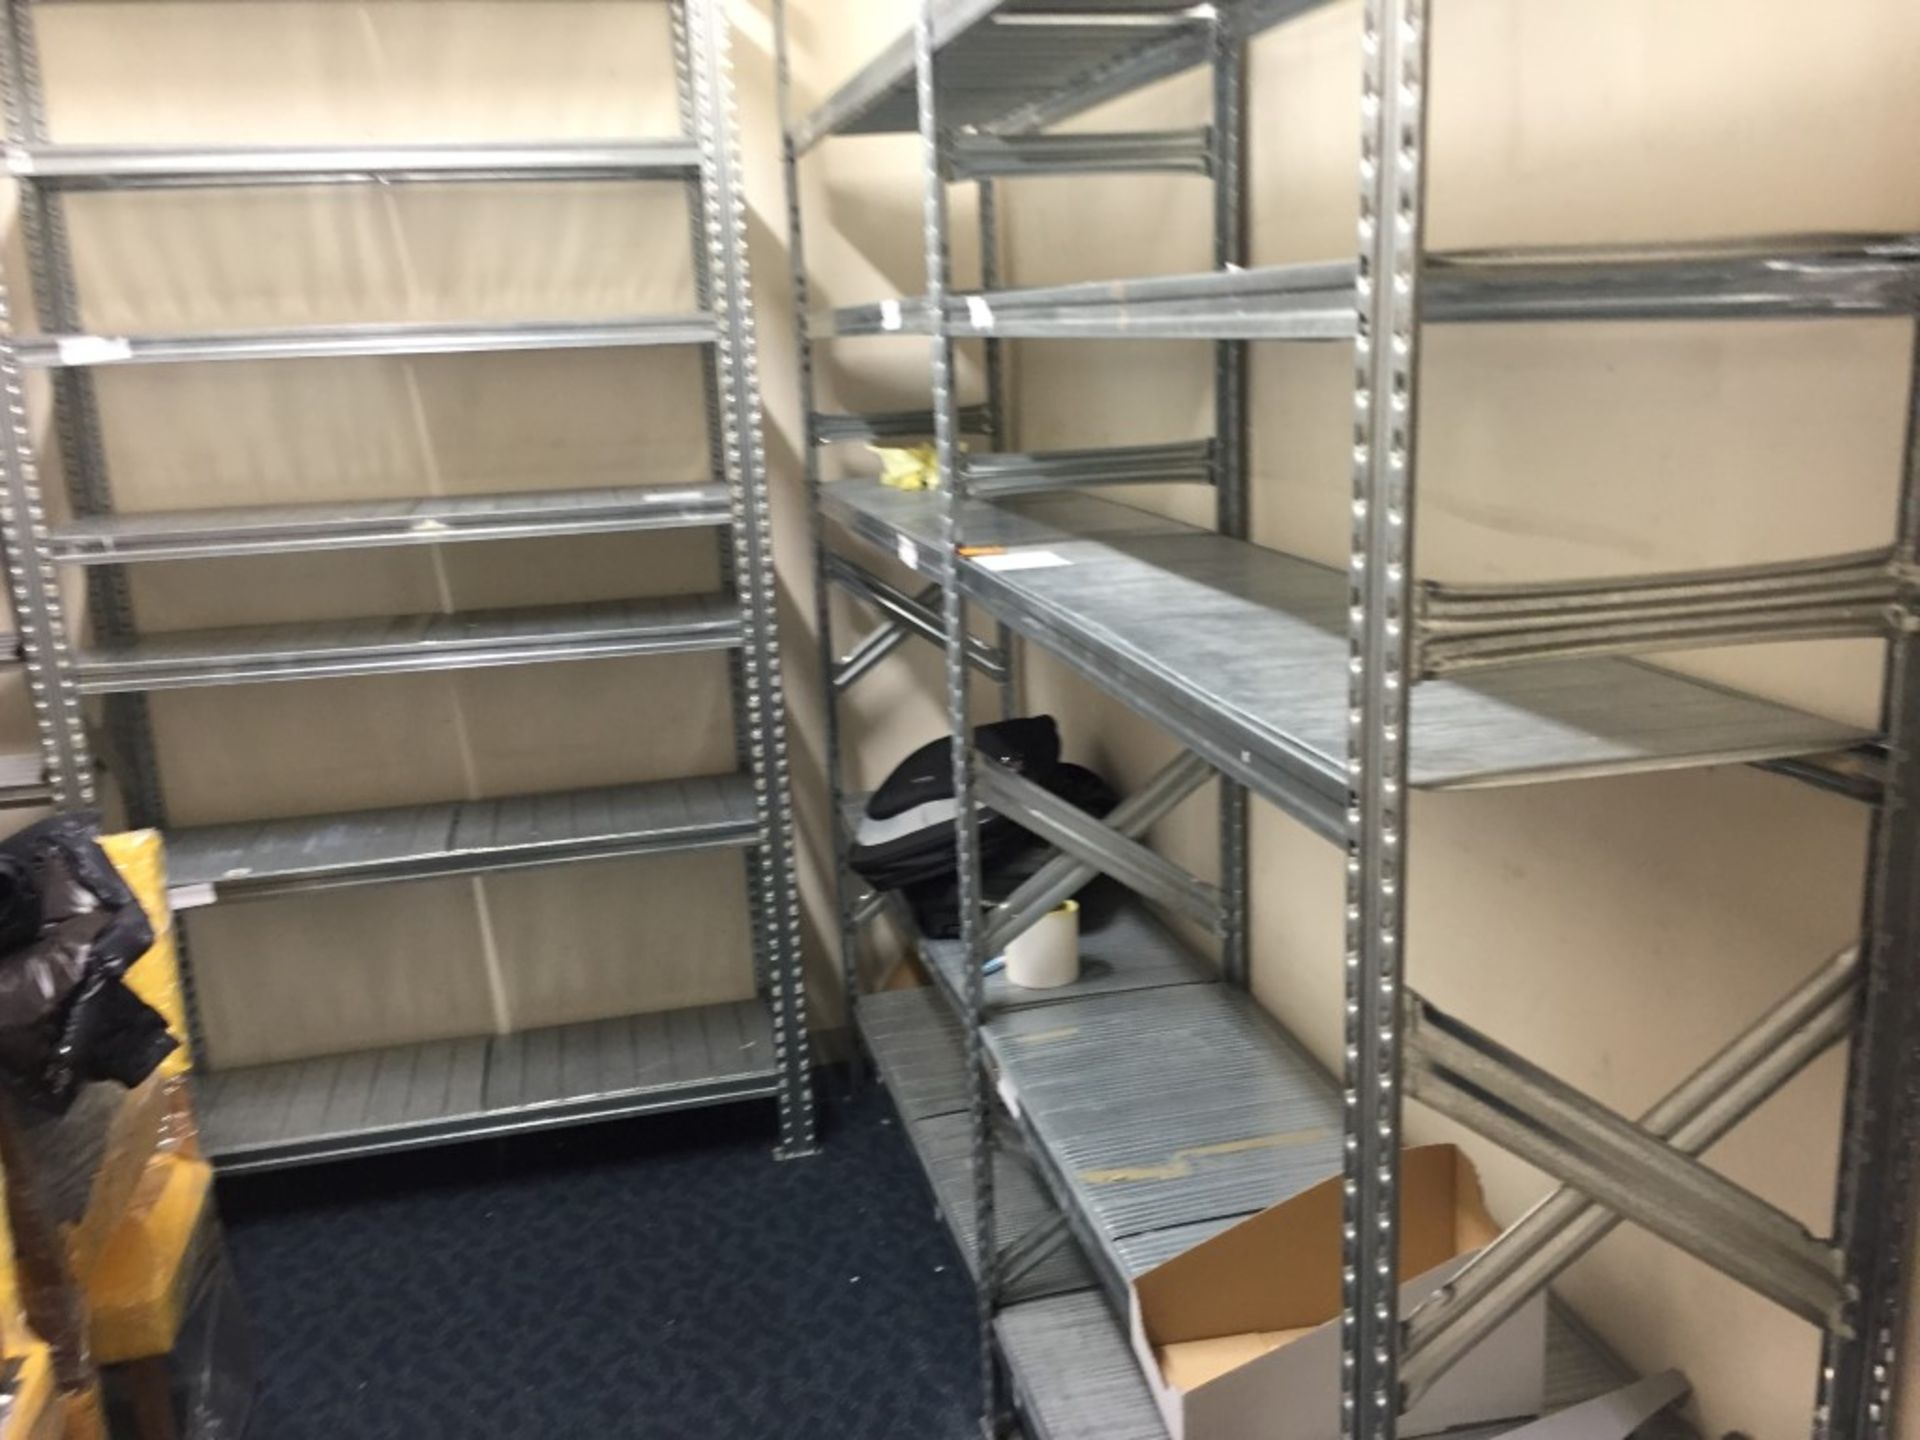 Job Lot of Italian made Metal Storage Racking with practical light weight shelving - Ideal for all - Image 2 of 6